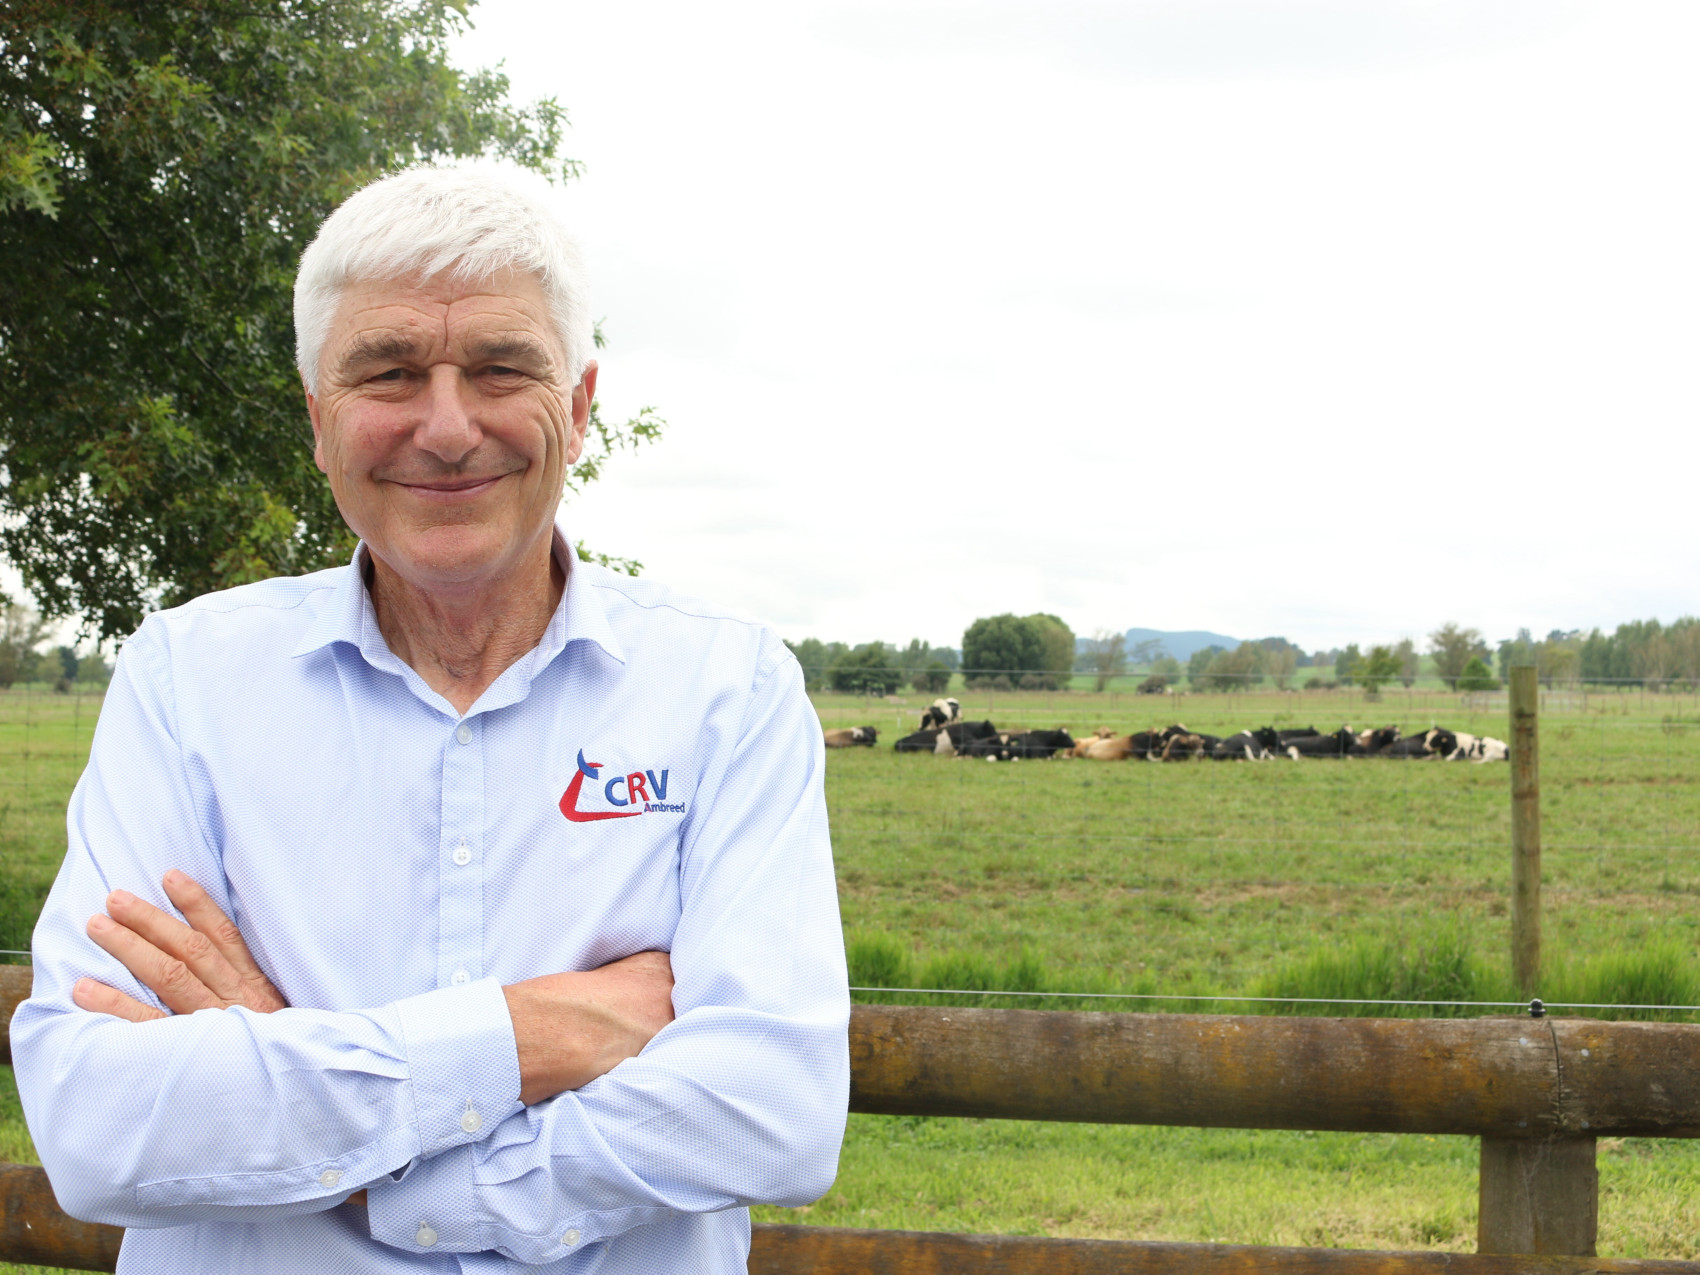 Humid weather highlights need for FE tolerant cows